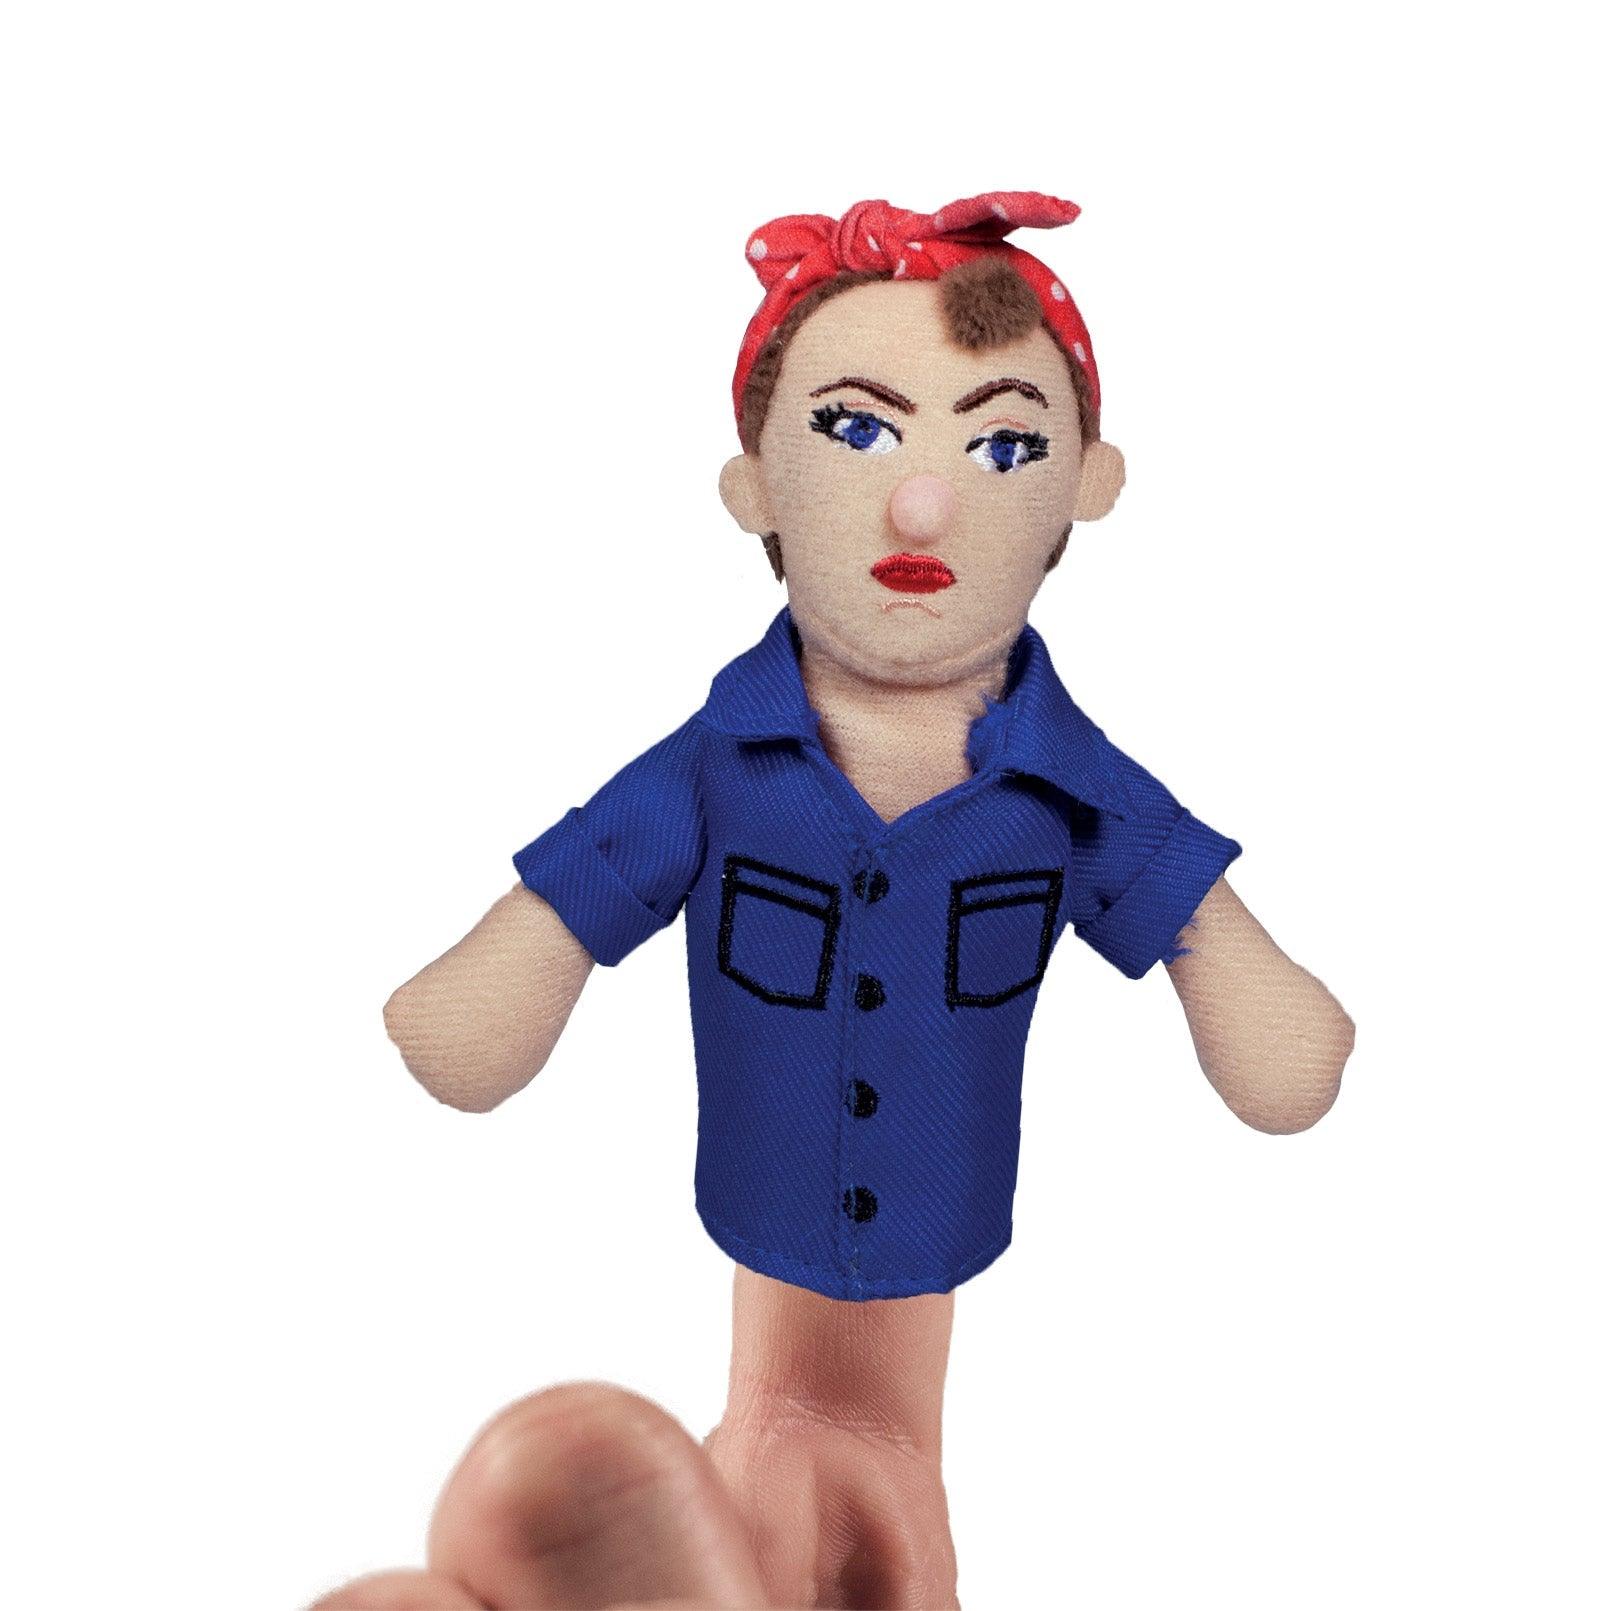 Product photo of Rosie the Riveter Finger Puppet, a novelty gift manufactured by The Unemployed Philosophers Guild.